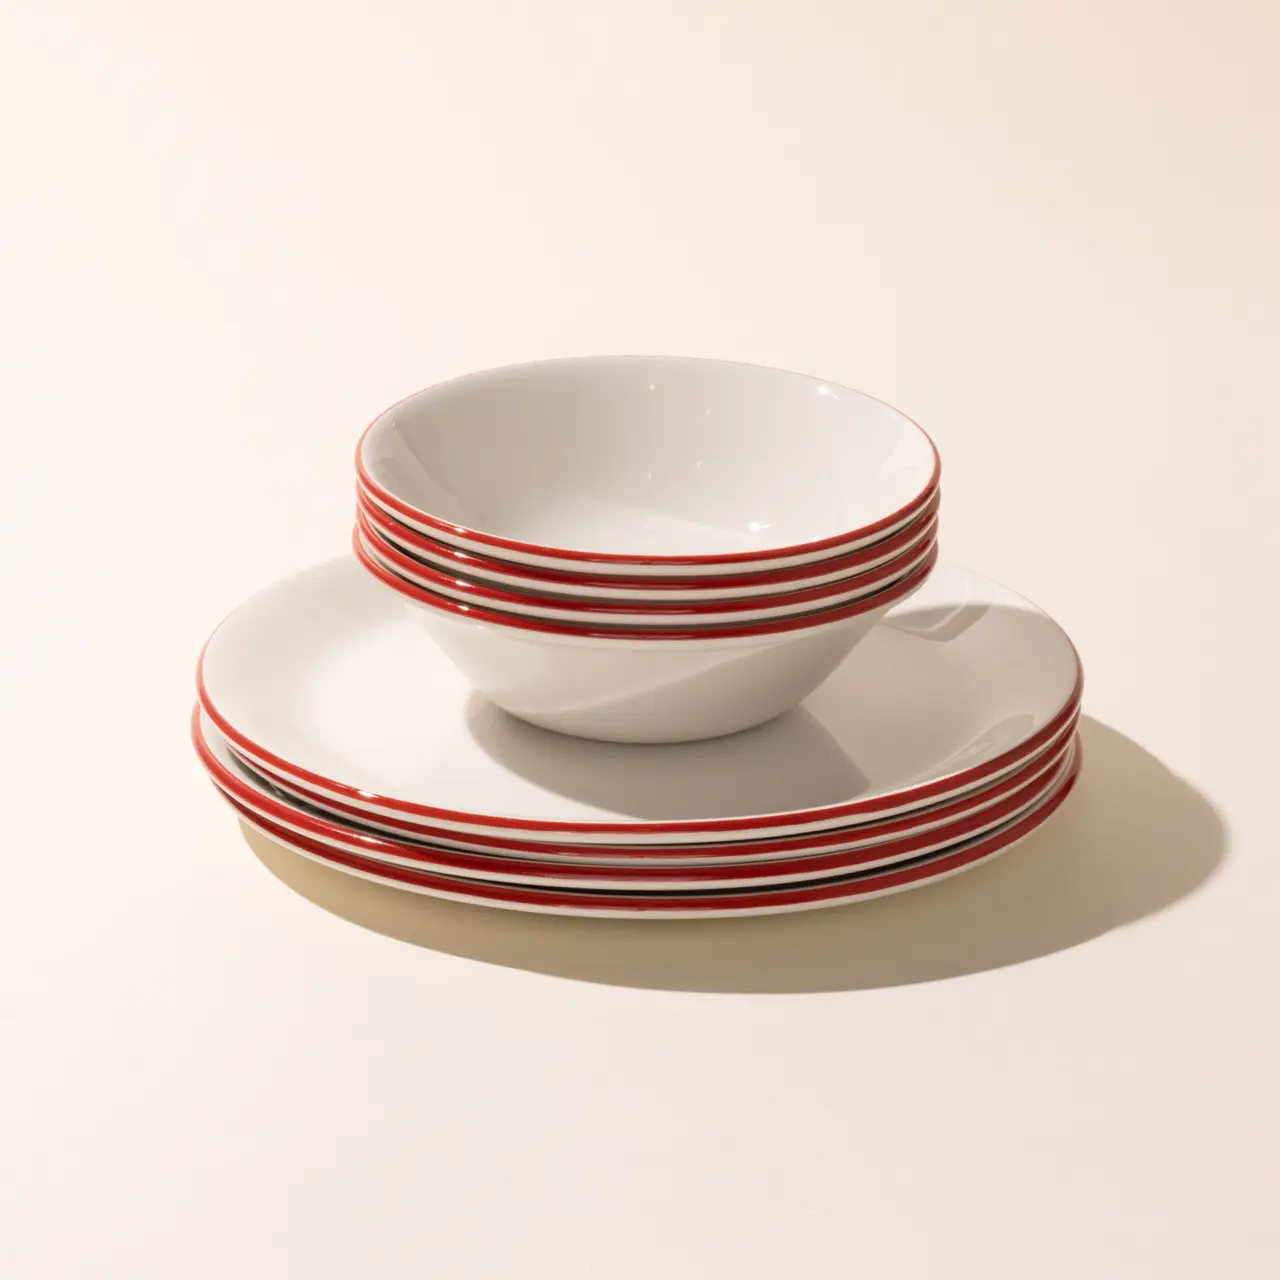 Plateware and Flatware Sets